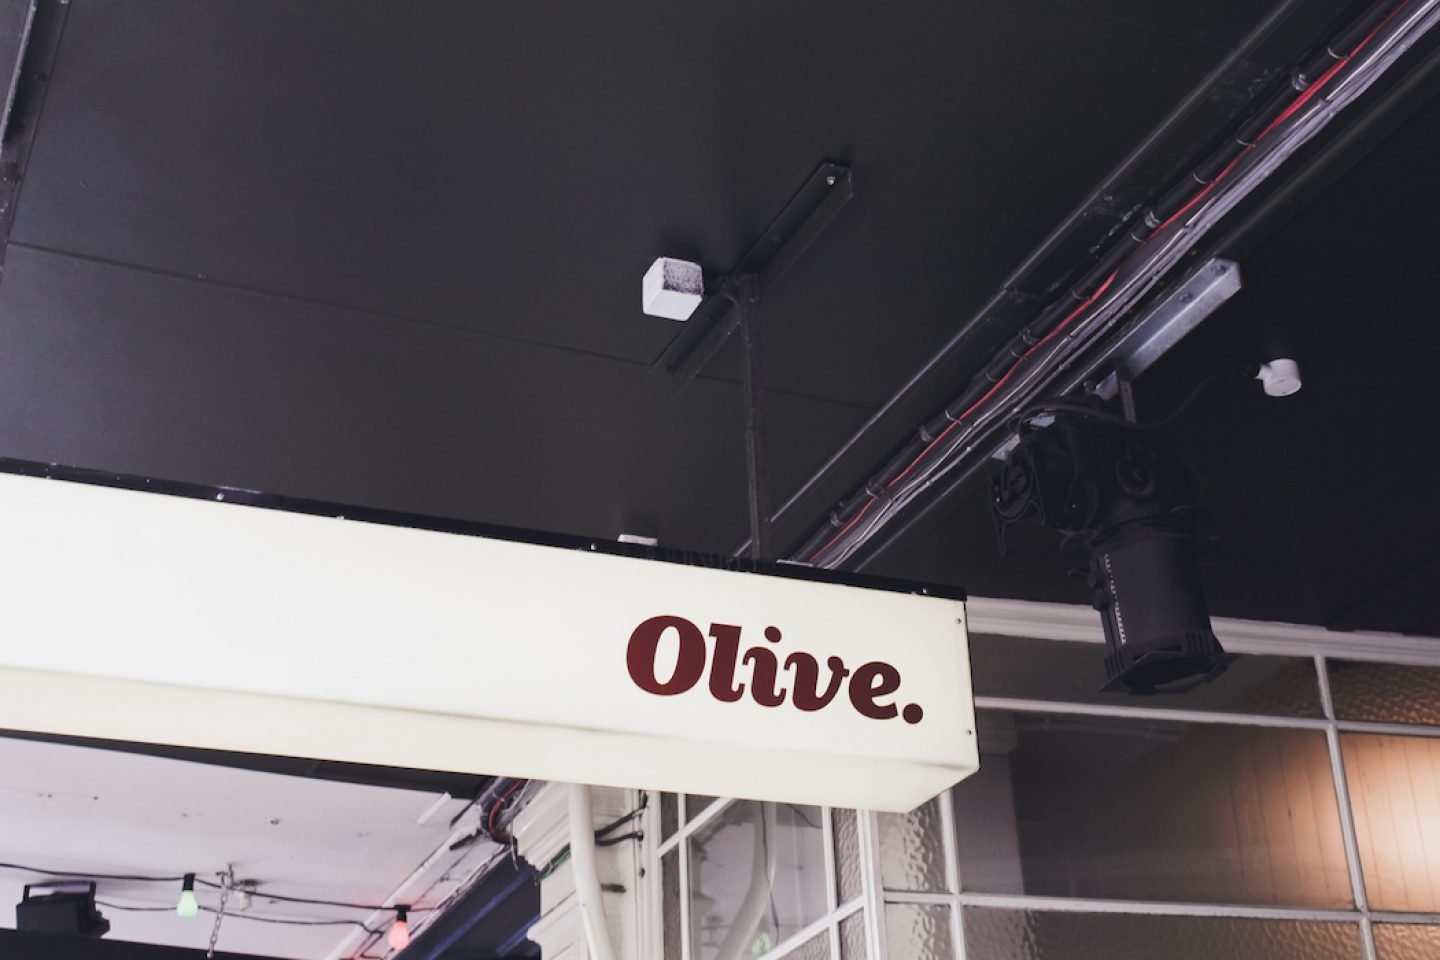 A_olive_001